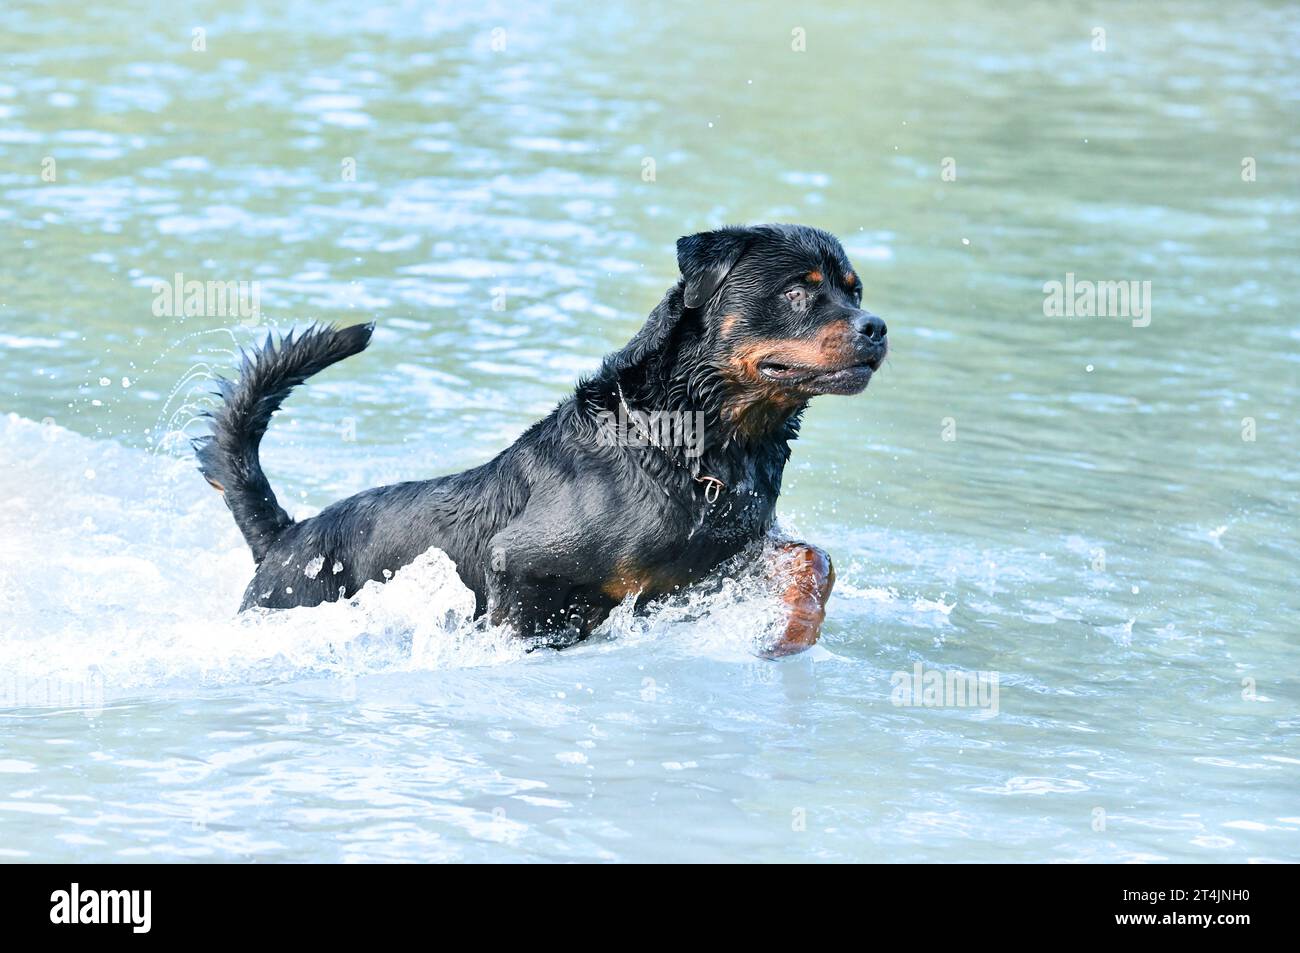 young rottweiler swimming in a river in summer Stock Photo